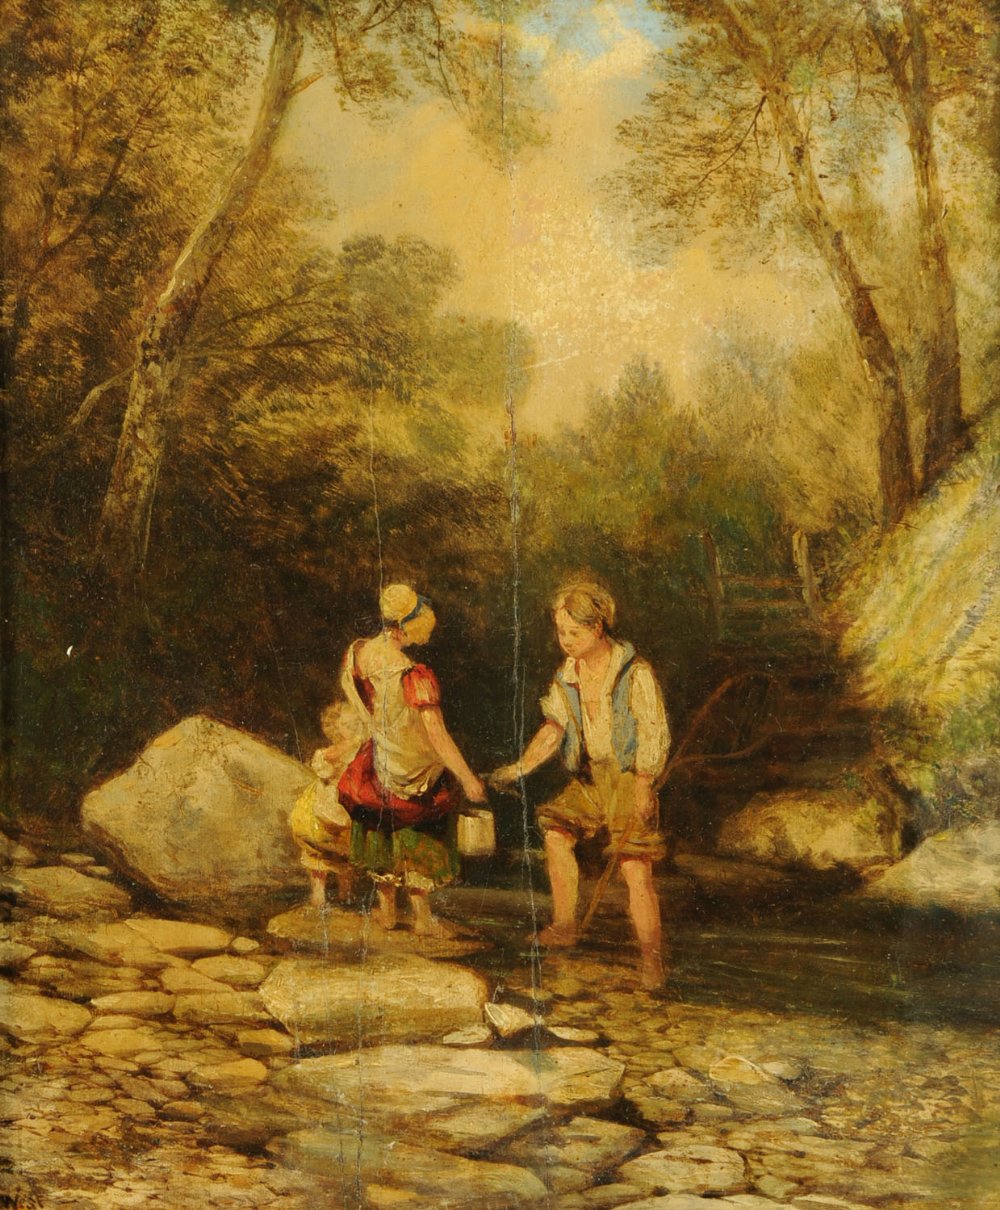 William West (1801-1861) Lake Artists Society, oil painting on panel, children by river amongst